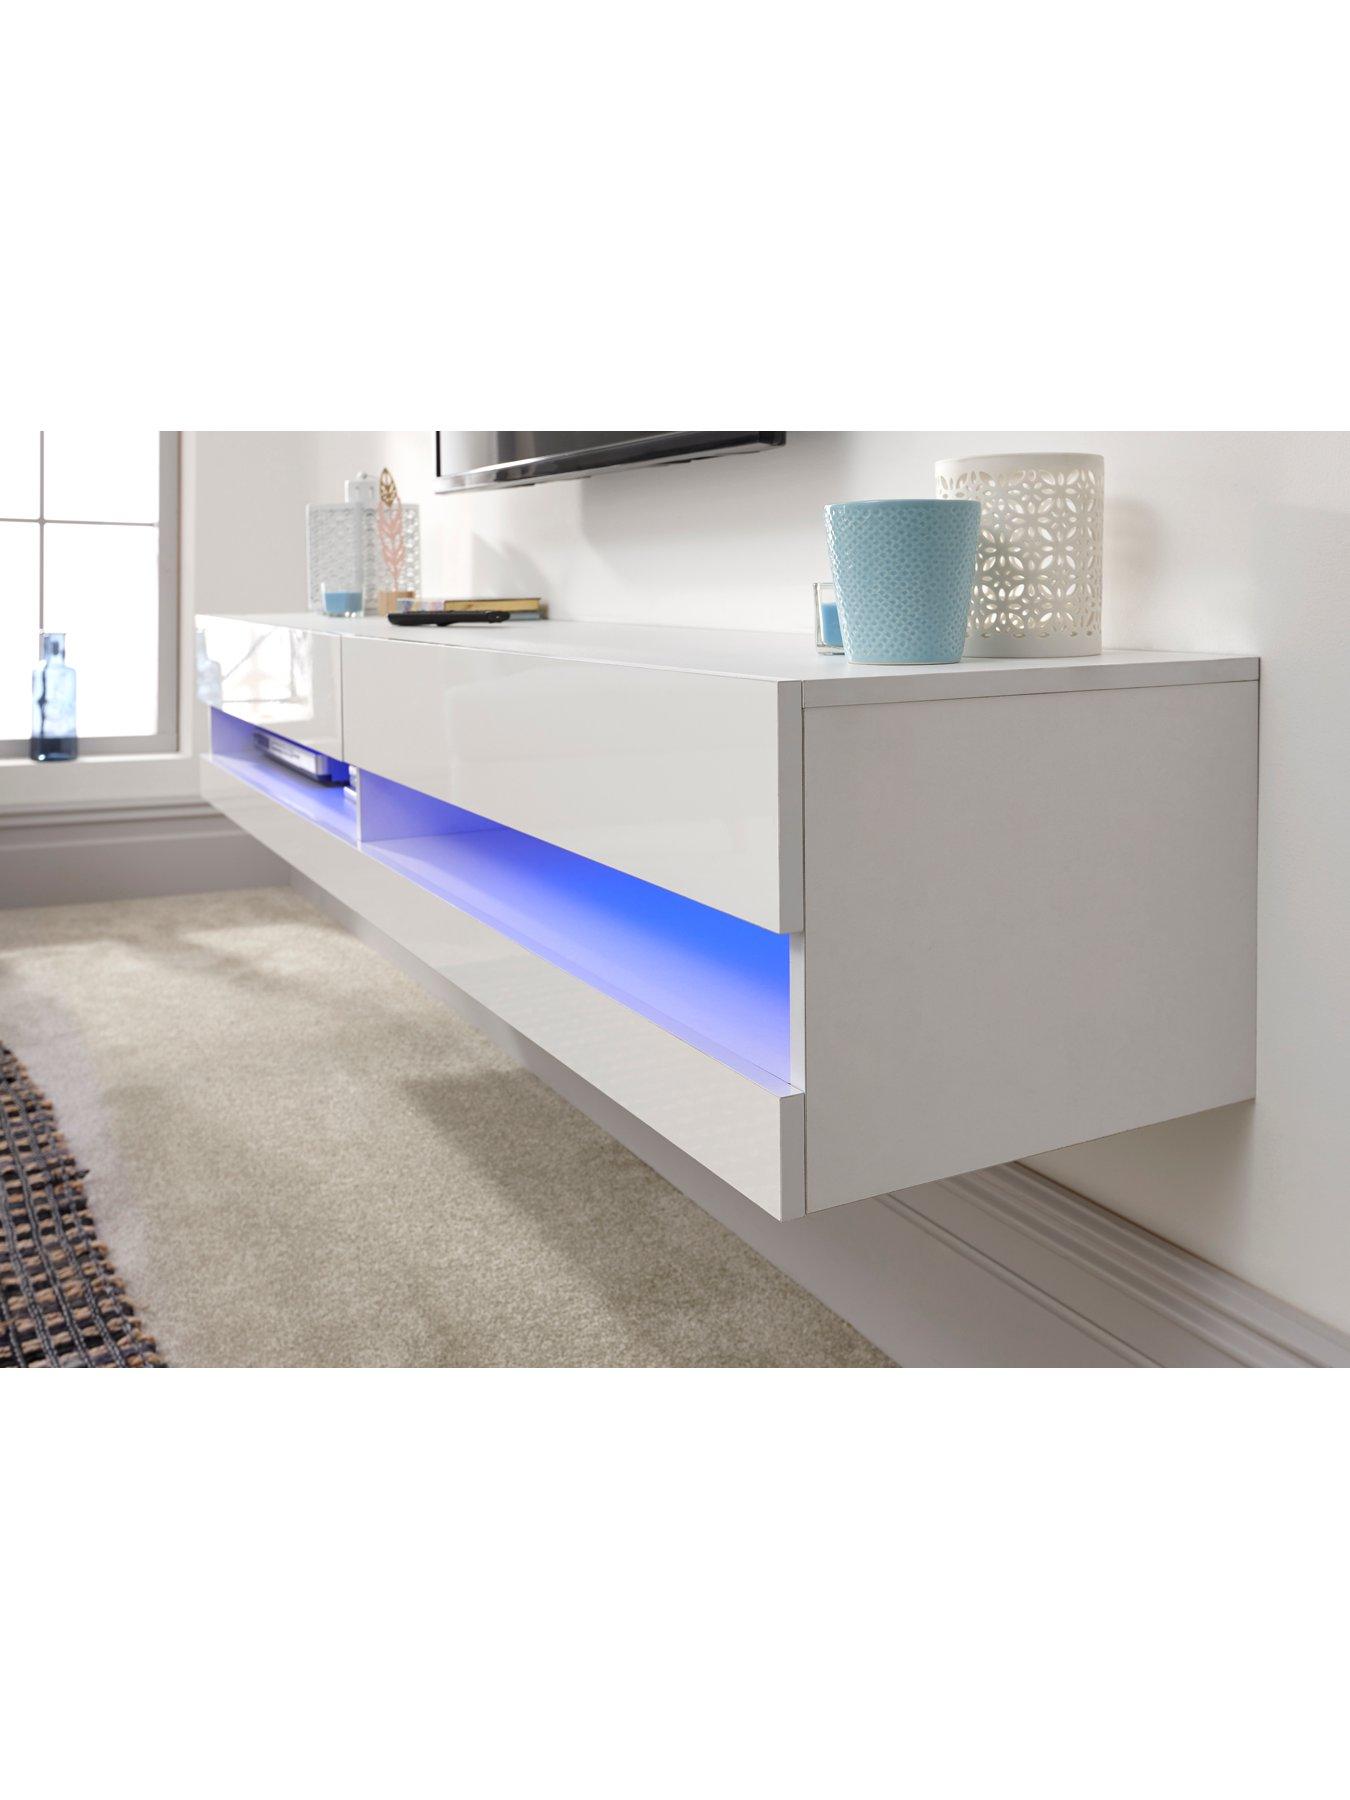 GFW Galicia 120cm Grey Wall TV Cabinet With LED Lighting